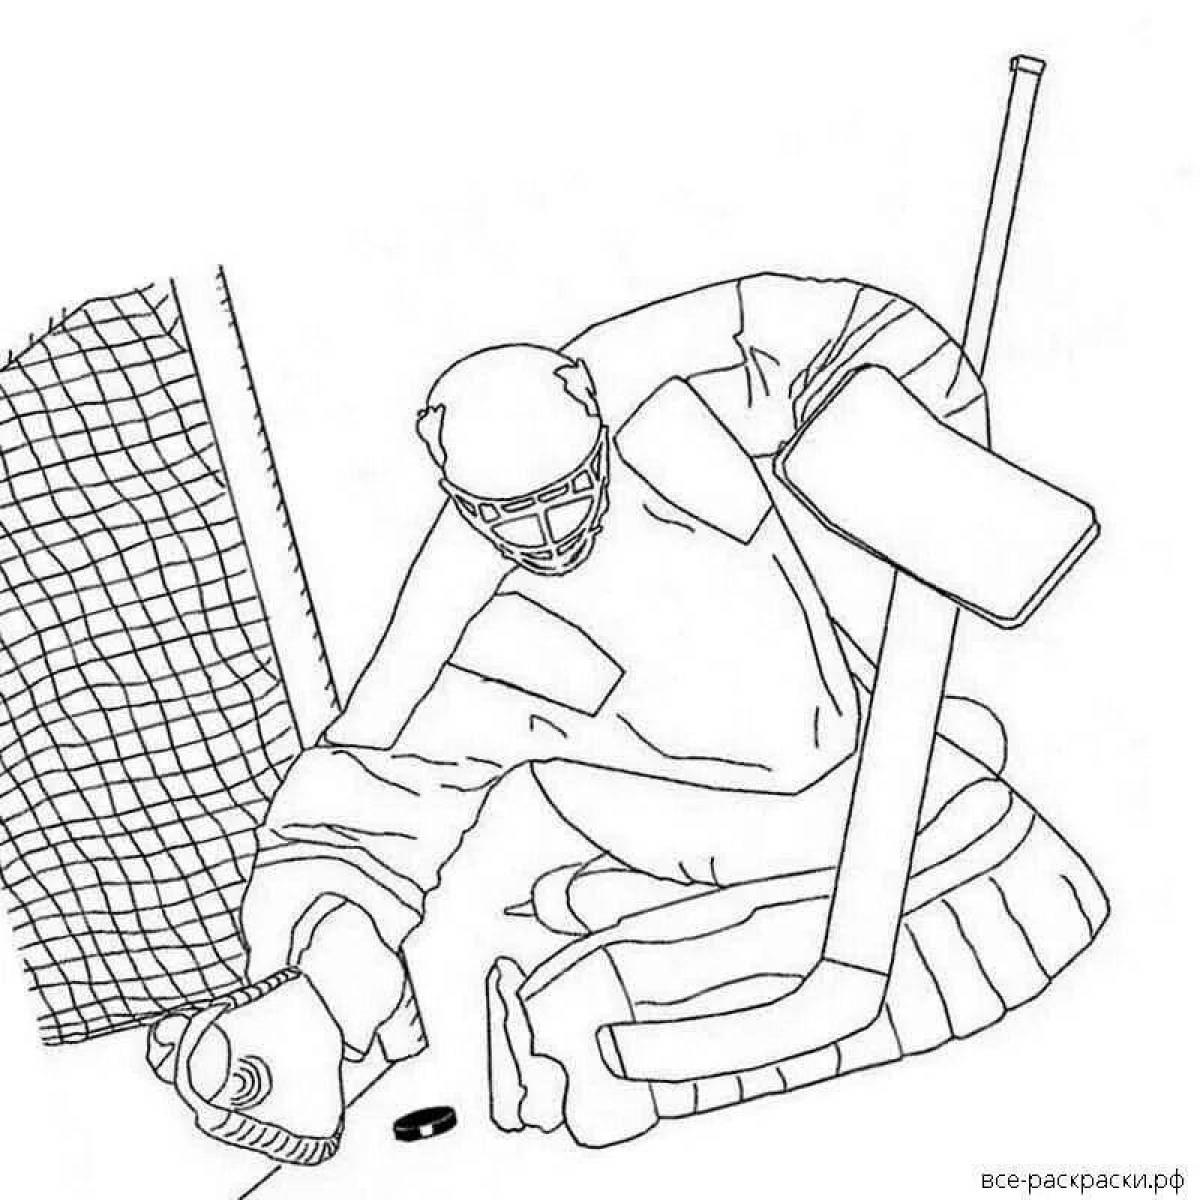 Colorful goalkeeper coloring page